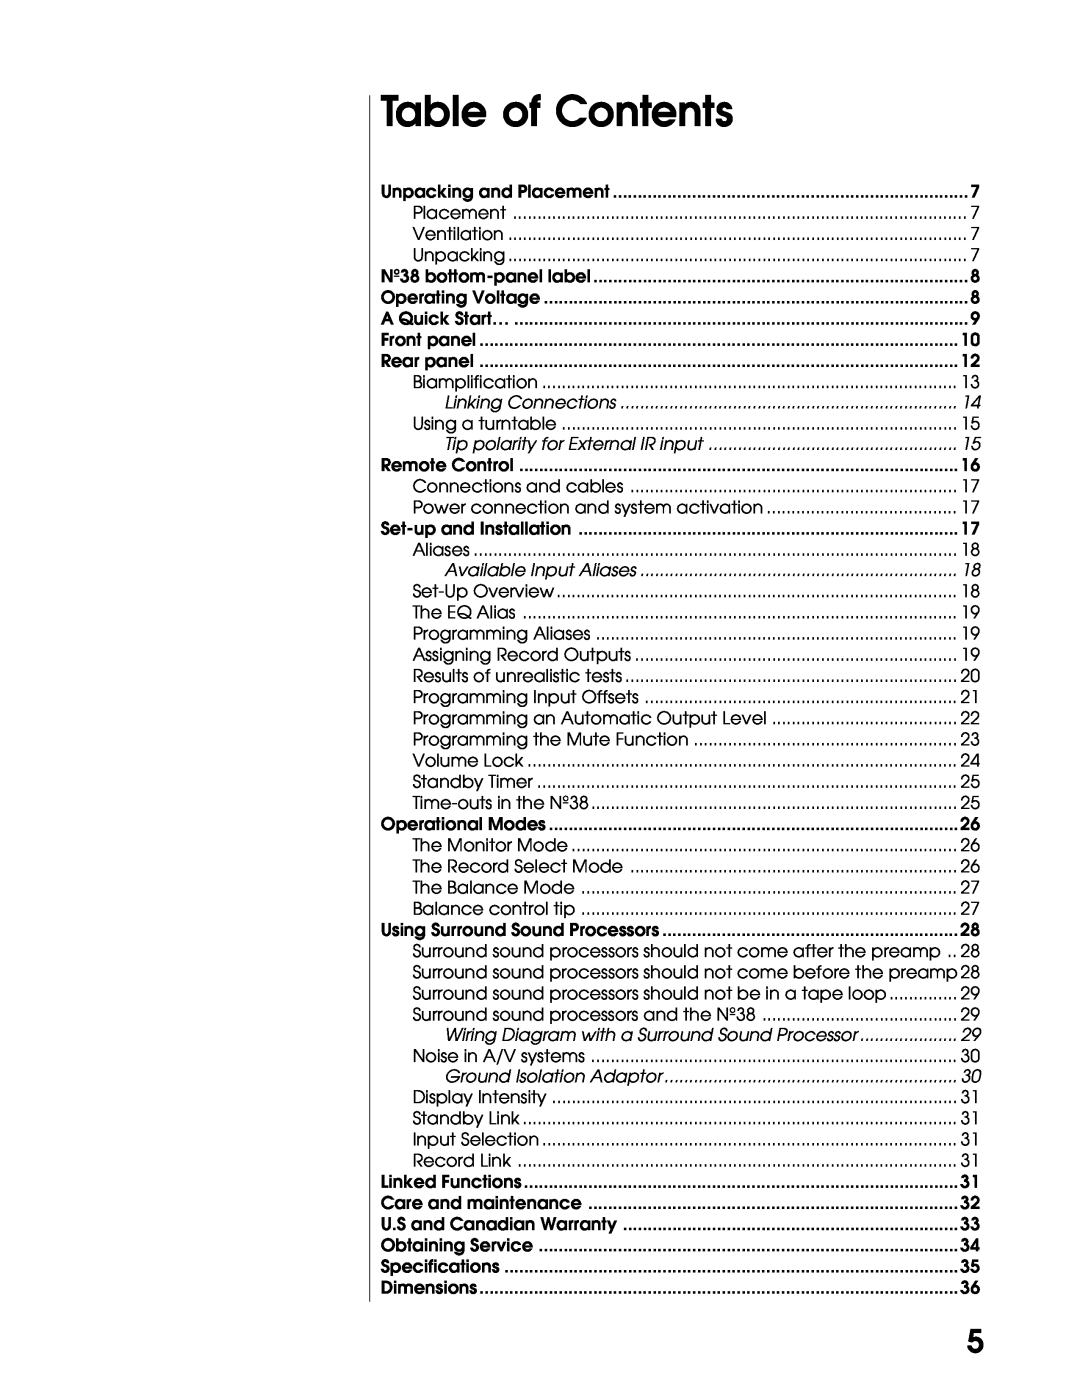 Madrigal Imaging N38 manual Table of Contents 